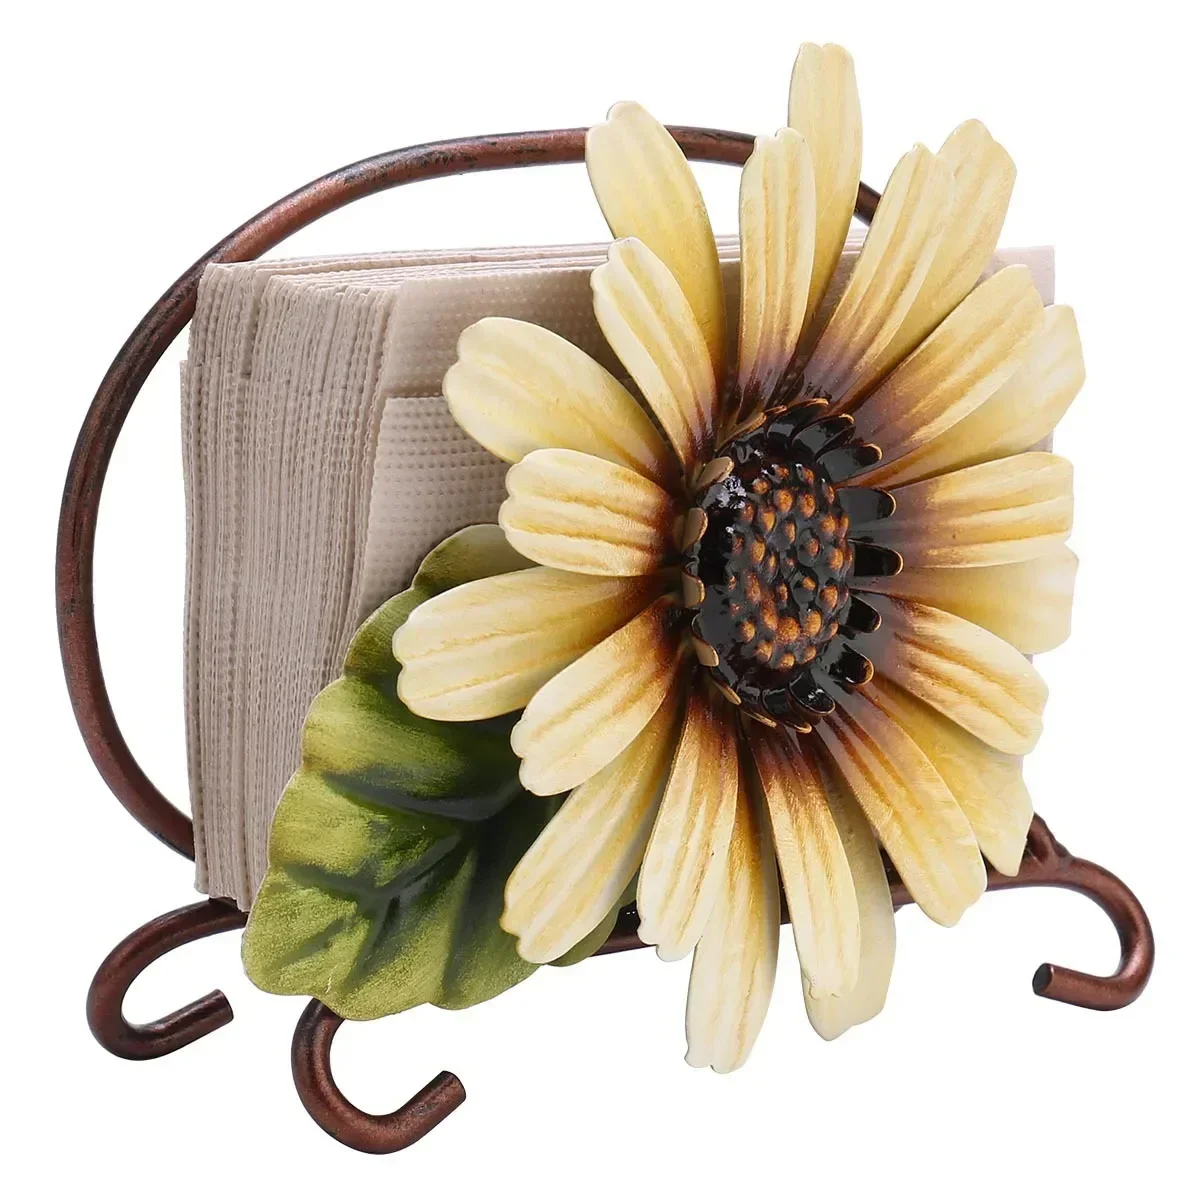 

Metal Creative Iron Paper Towel Holder Retro Pastoral Country American Chrysanthemum Napkin Holder Ornament Suitable for Bedroom